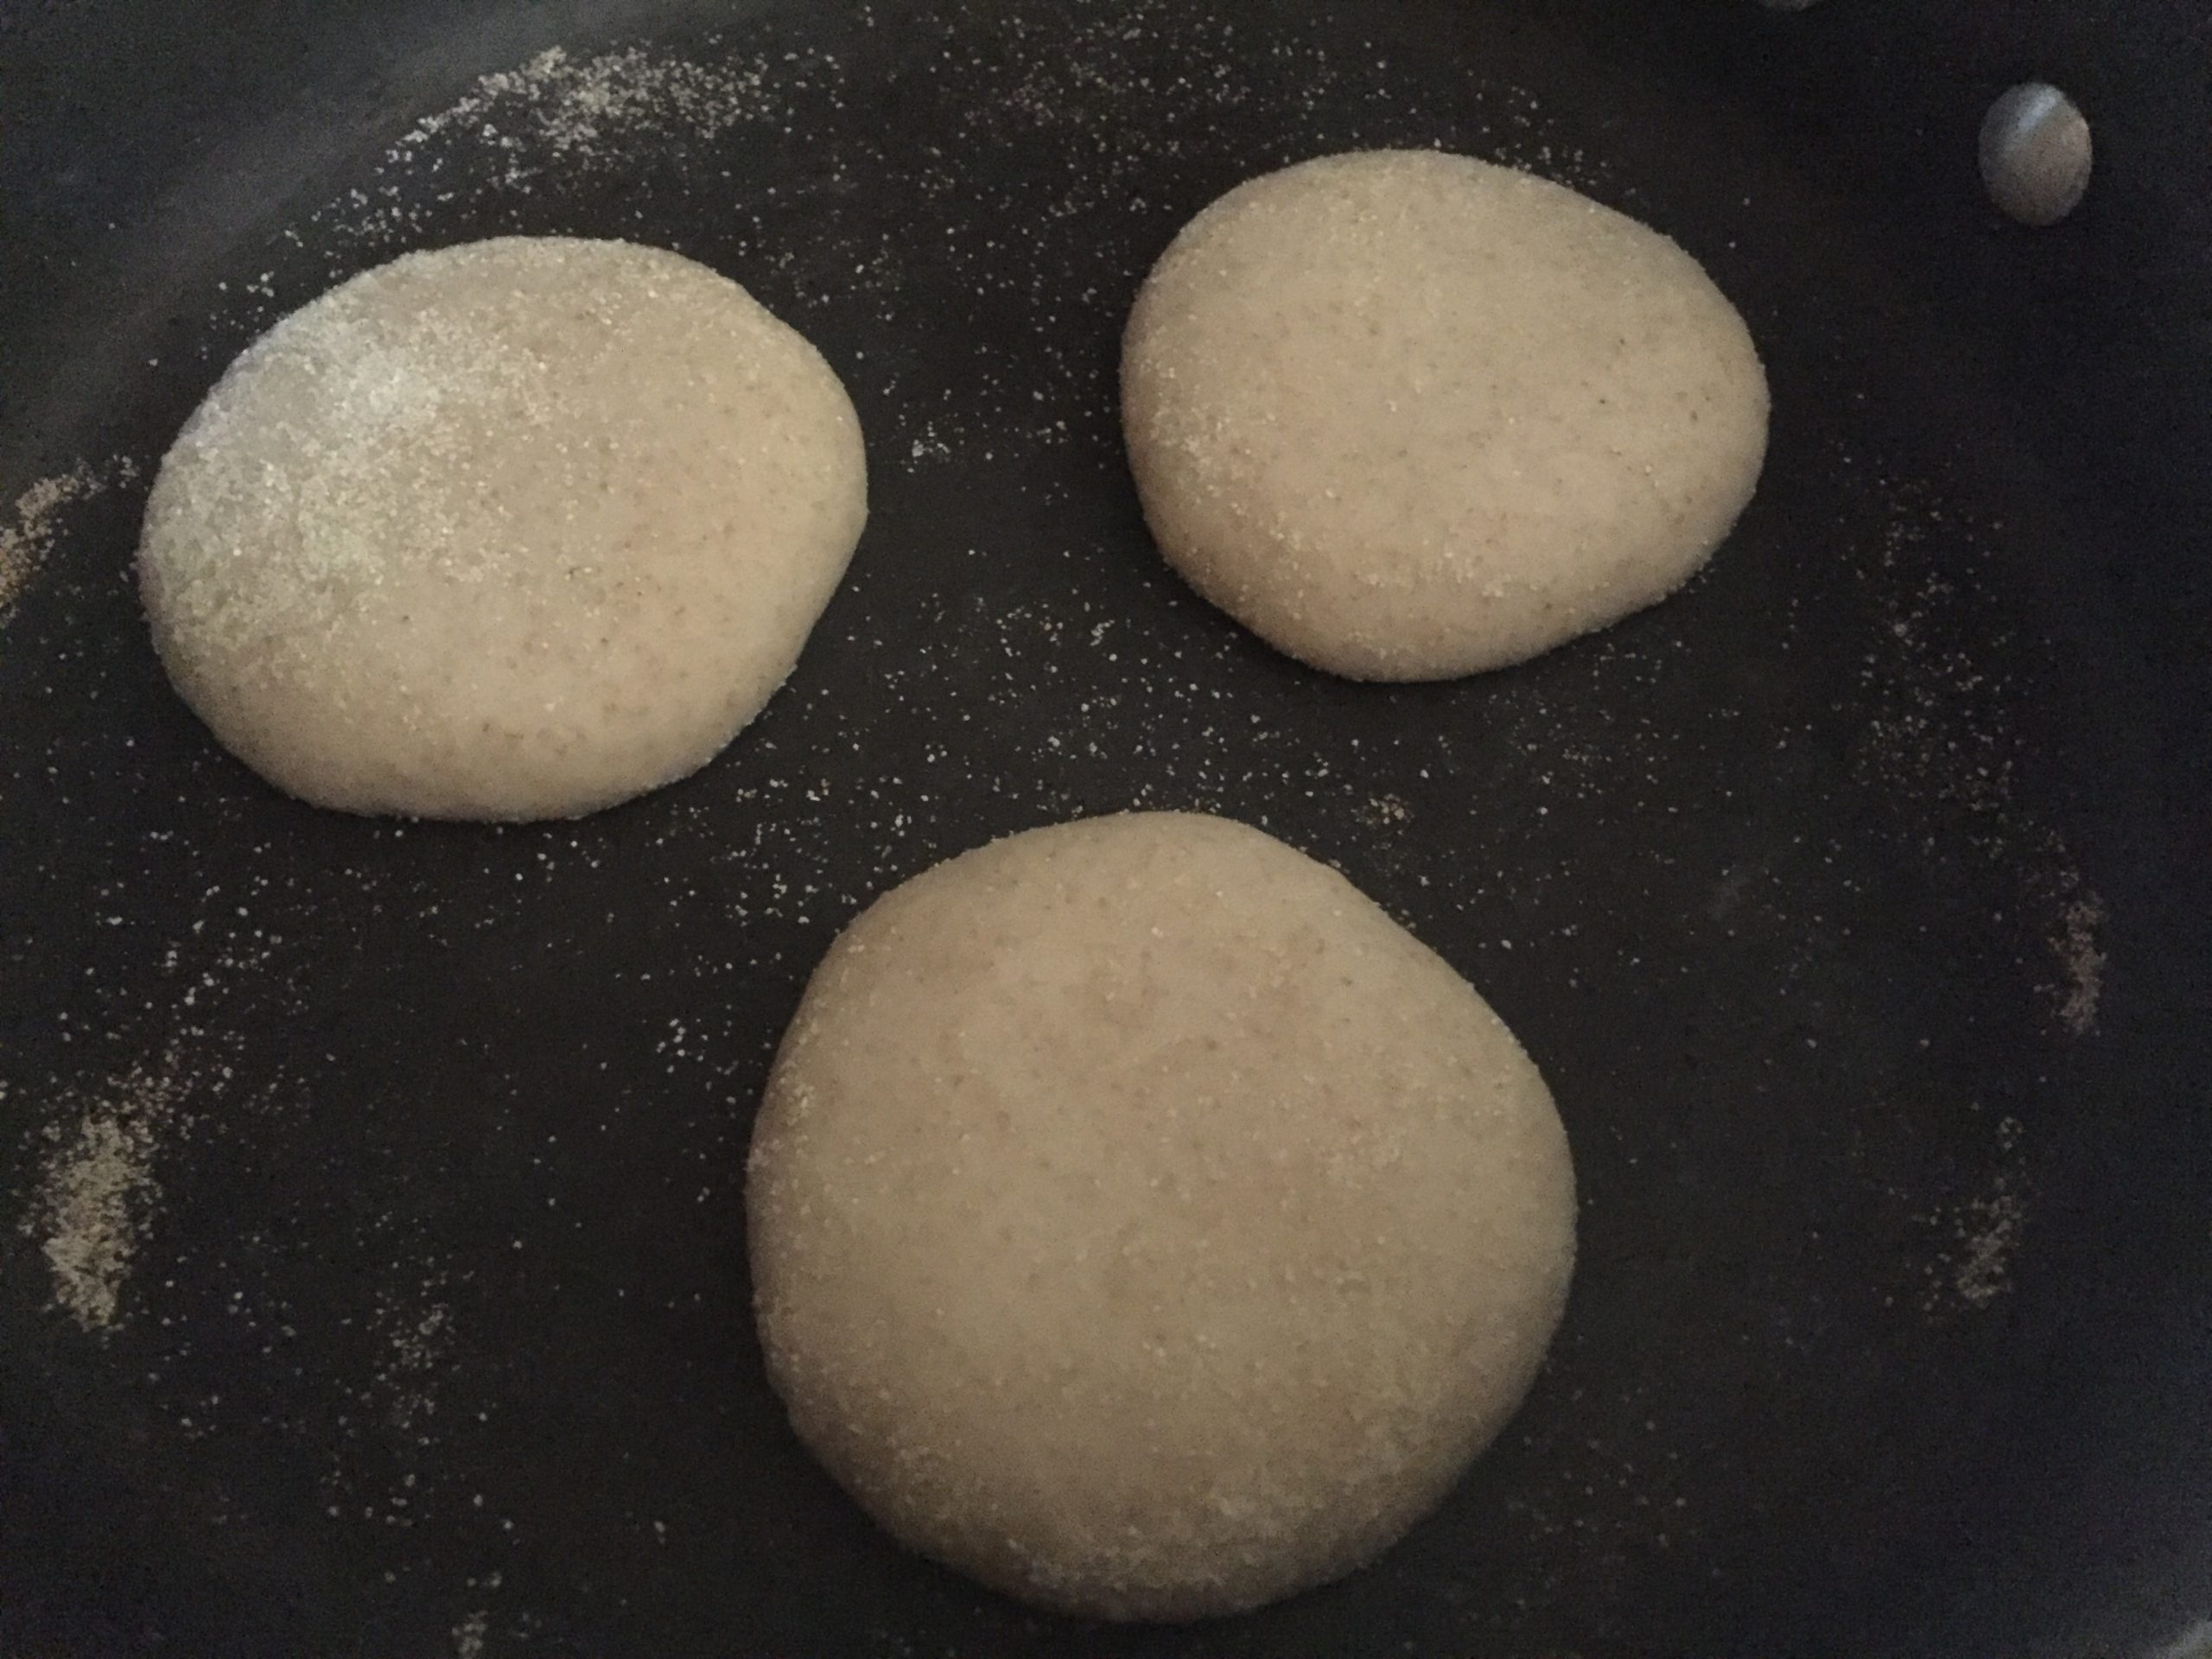 Cooking English muffins on a griddle